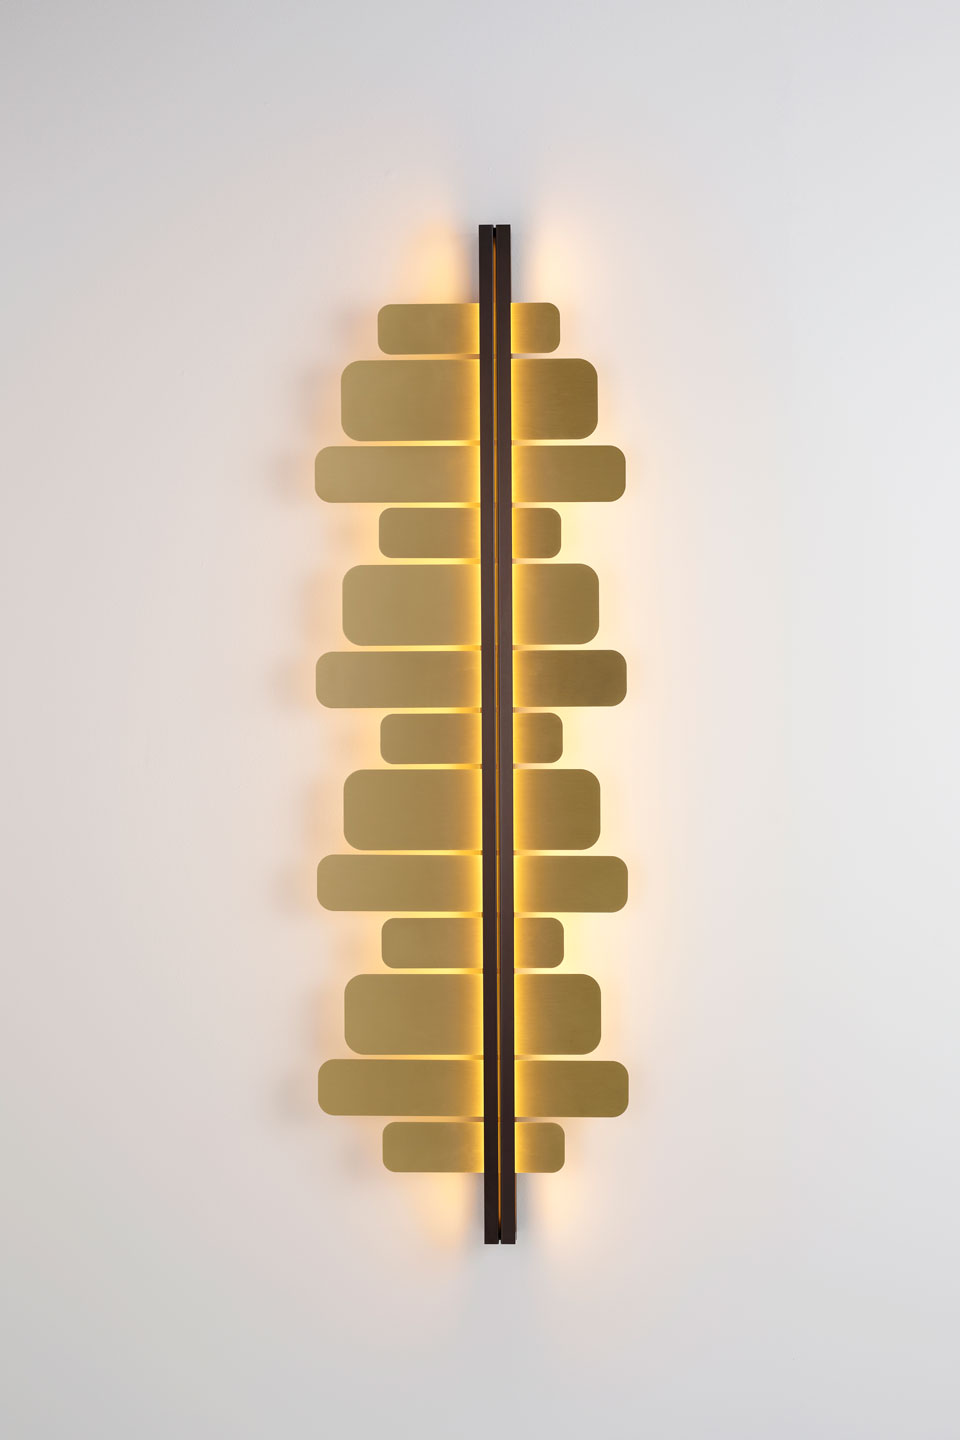 Strate Score large vertical gold sconce. CVL Luminaires. 